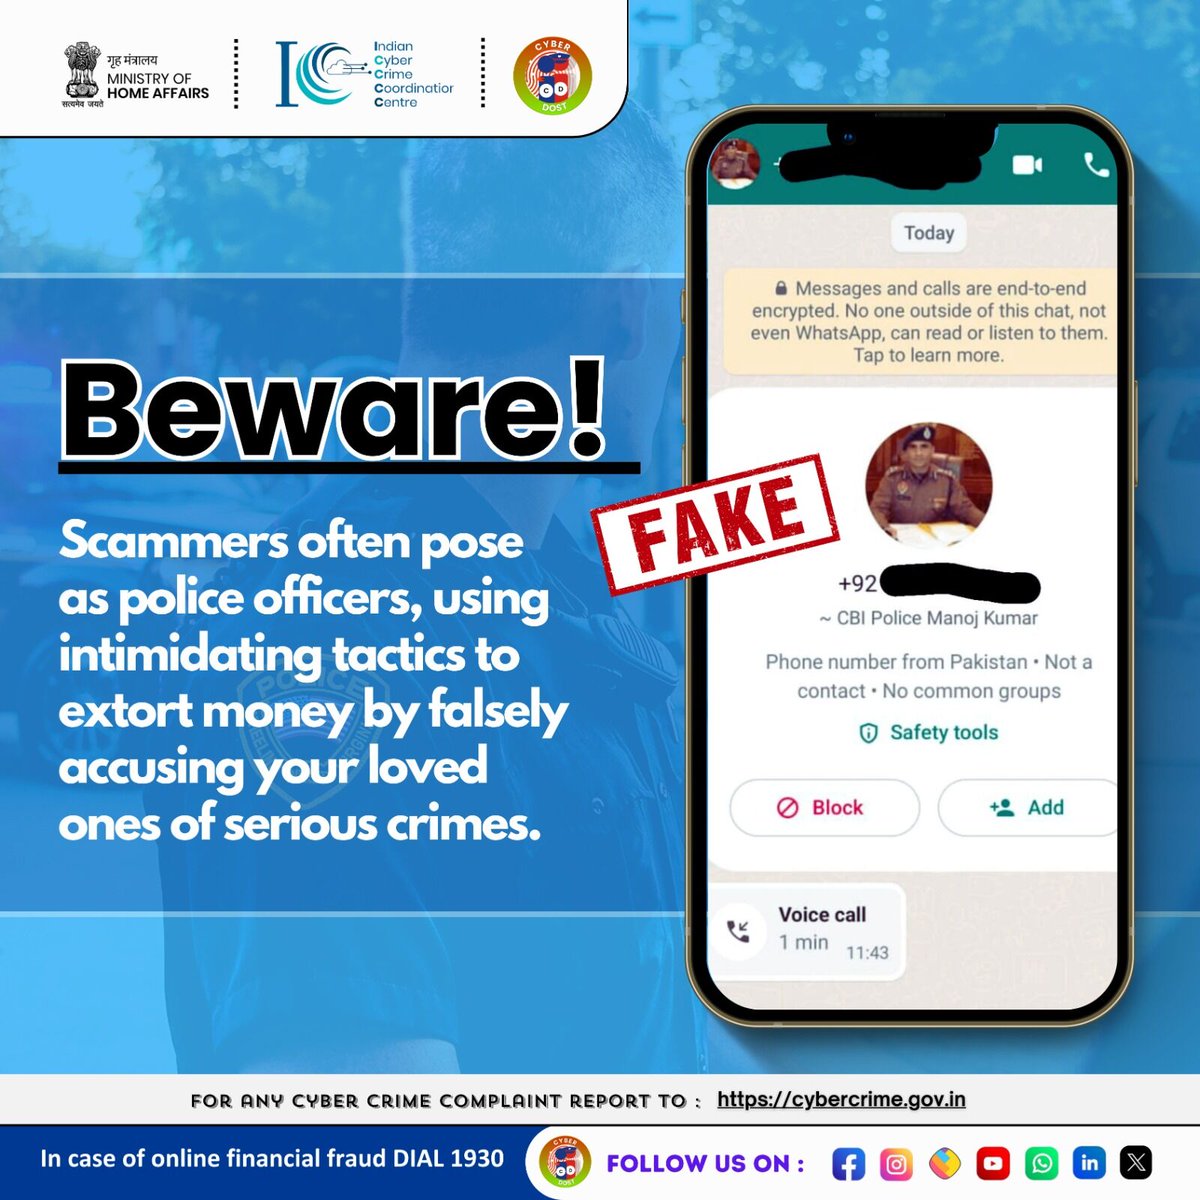 Beware of Scammers Posing as Police Officers! 🚨 who impersonate law enforcement officers to extort money. Stay vigilant and report any suspicious activity! #CyberSafeIndia #CyberAware #StayCyberWise #I4C #MHA #fraud #newsfeed